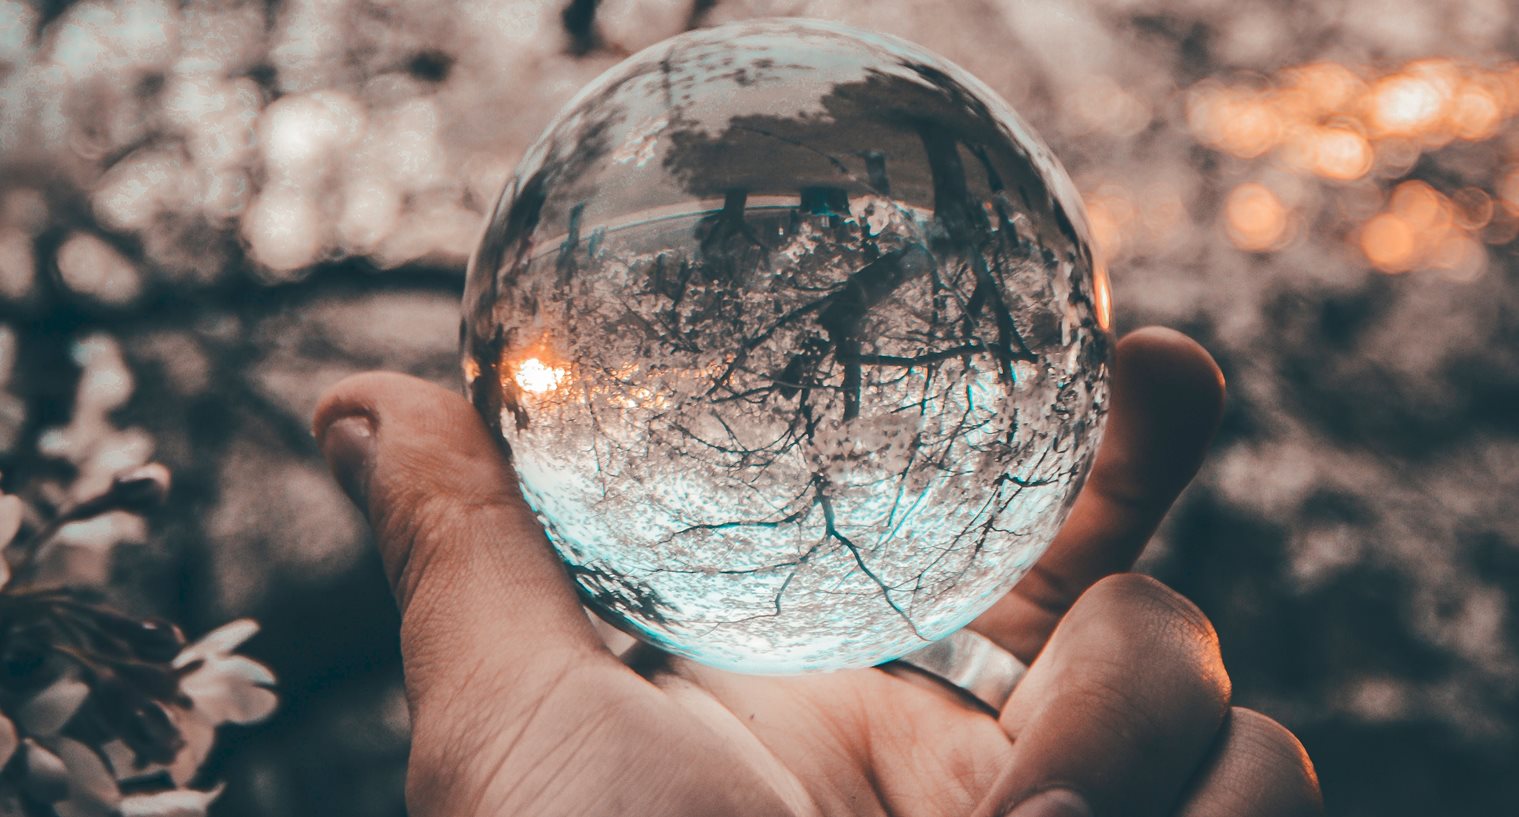 Hand holding glass ball which reflects inverted image of bare trees in background